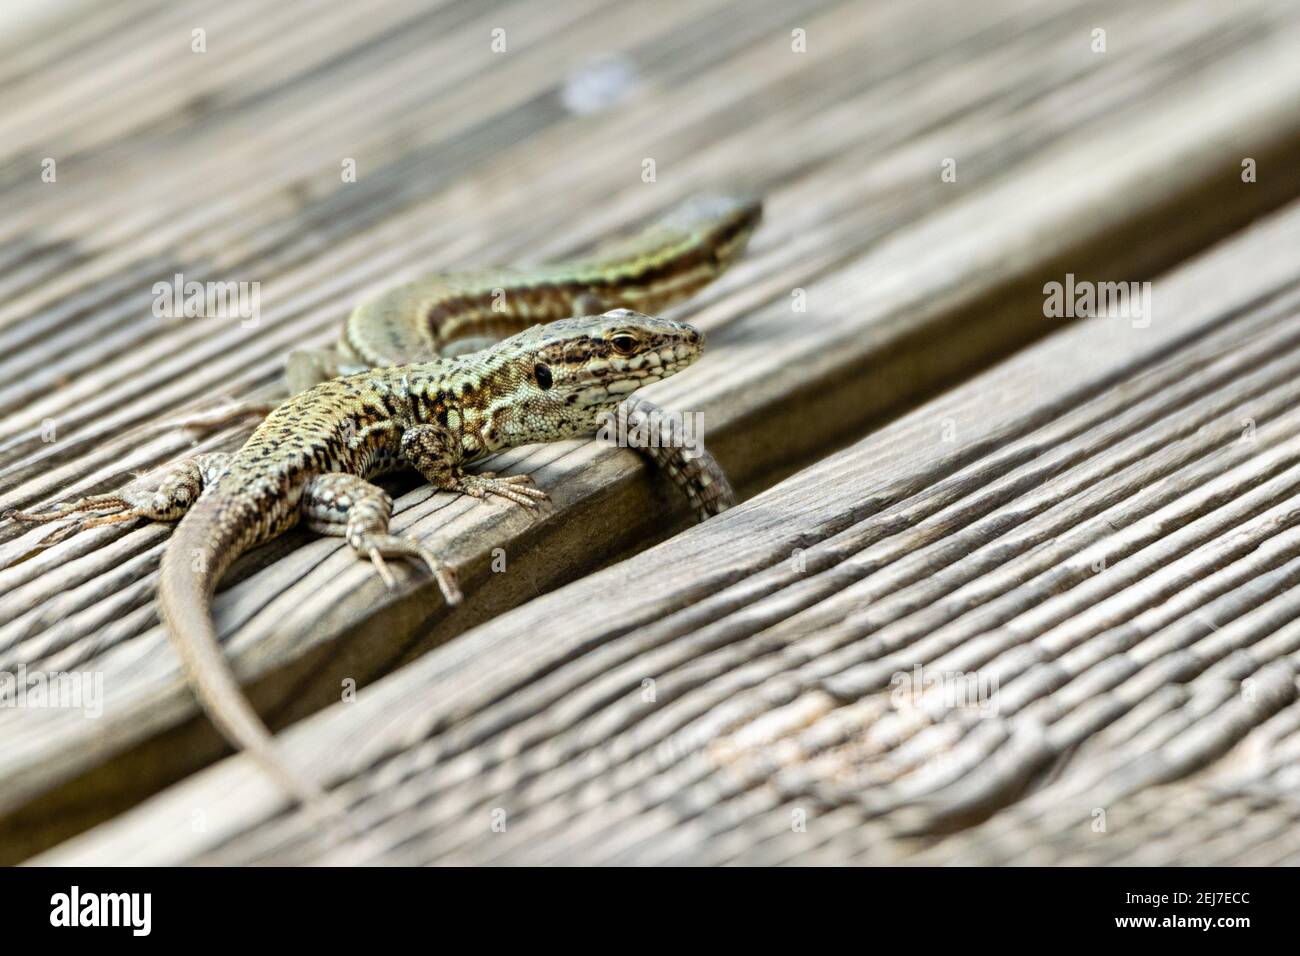 view of wall lizard on wooden board Stock Photo